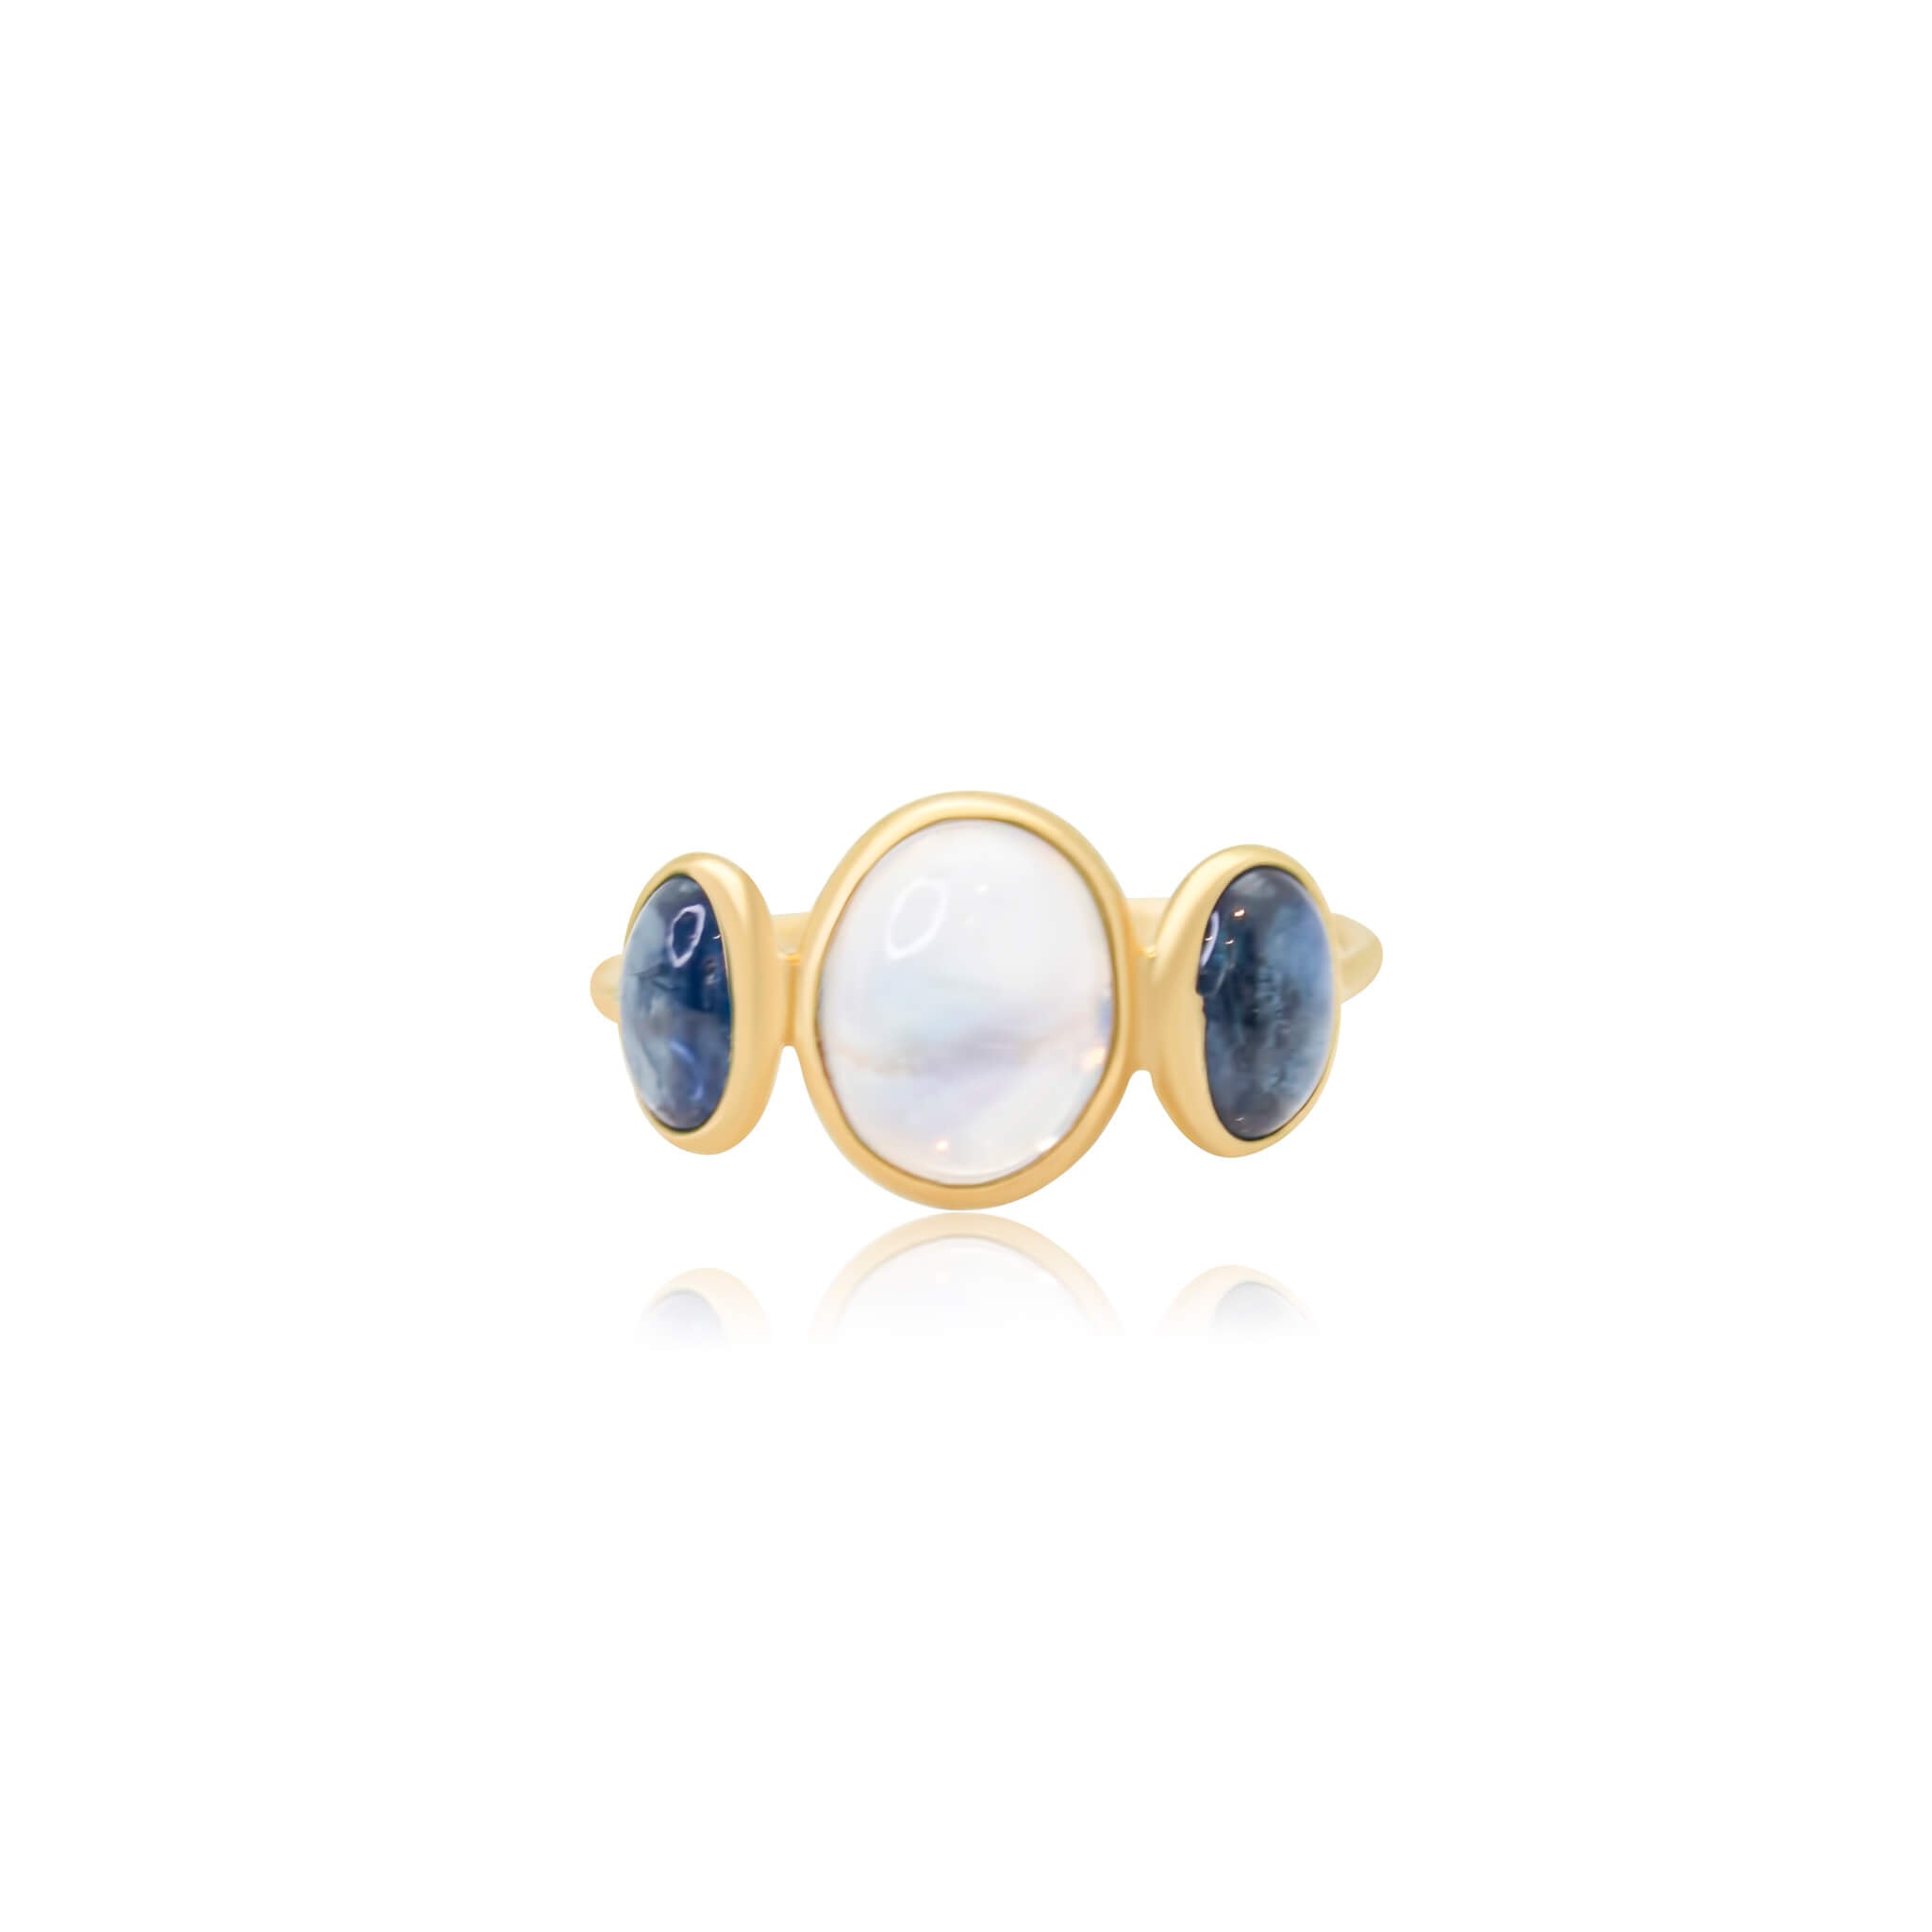 Rainbow Moonstone and Twisted Sterling Silver Cocktail Ring - Moon Vision |  NOVICA